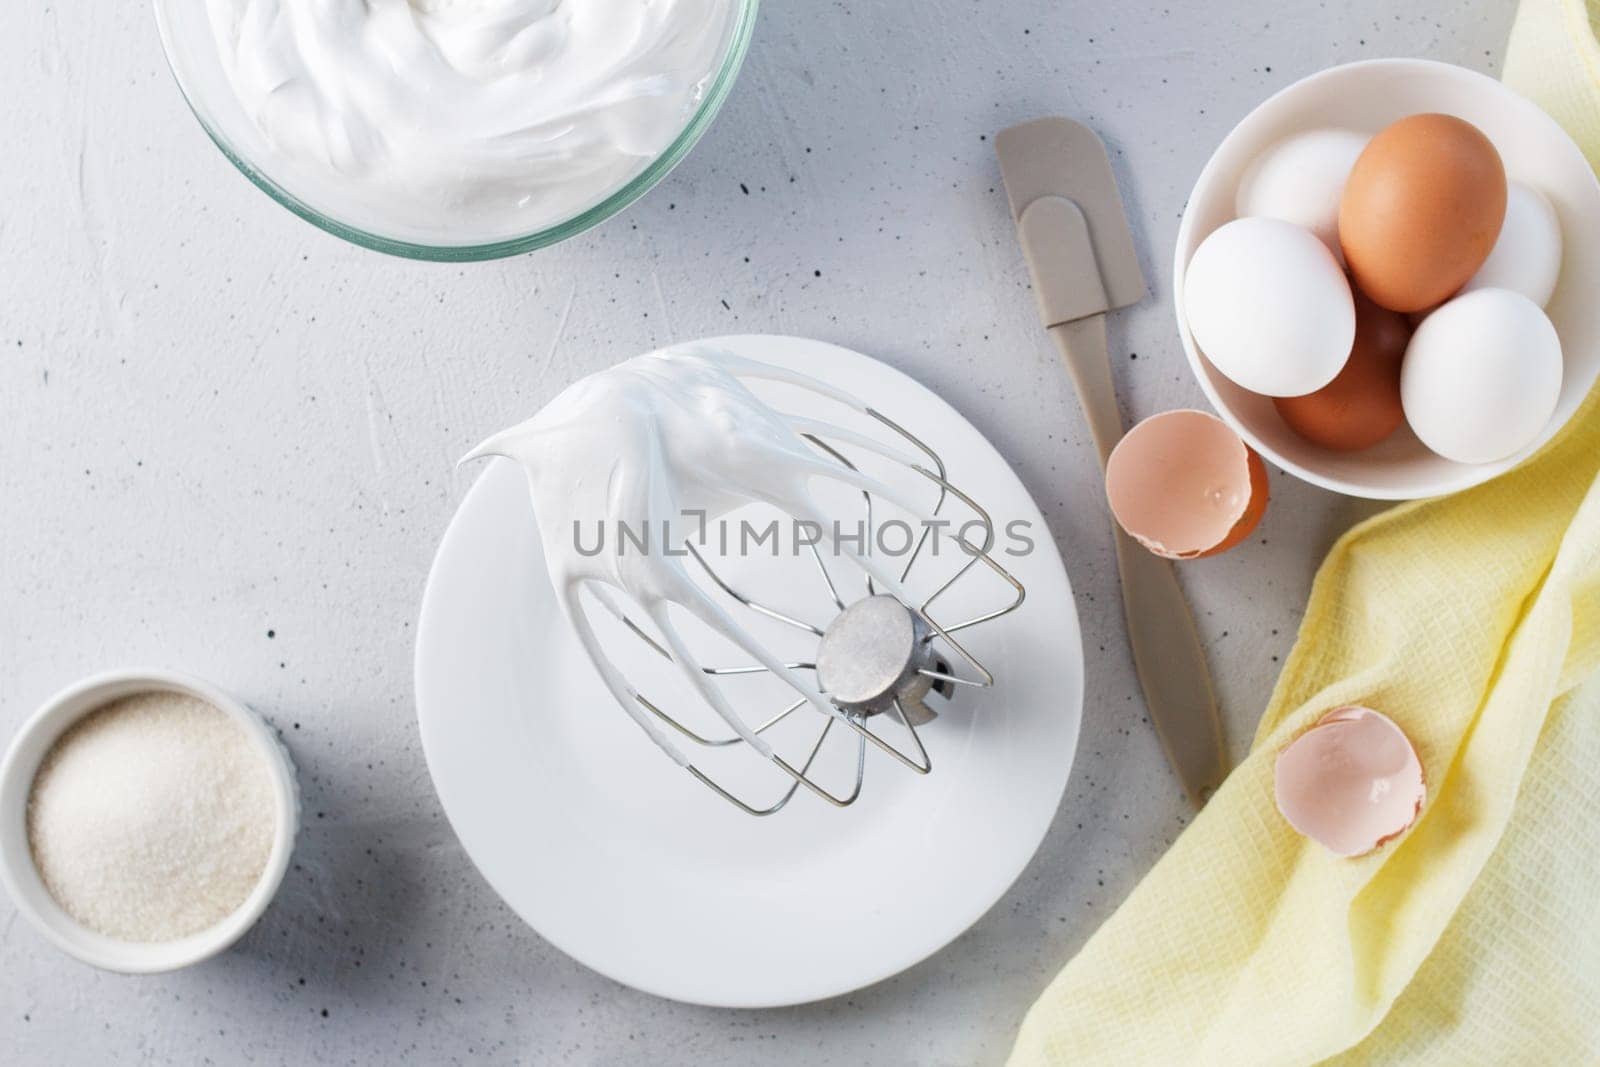 Whipped egg whites - whipped Italian meringue on a wire whisk, eggs, sugar, on a gray background. by lara29